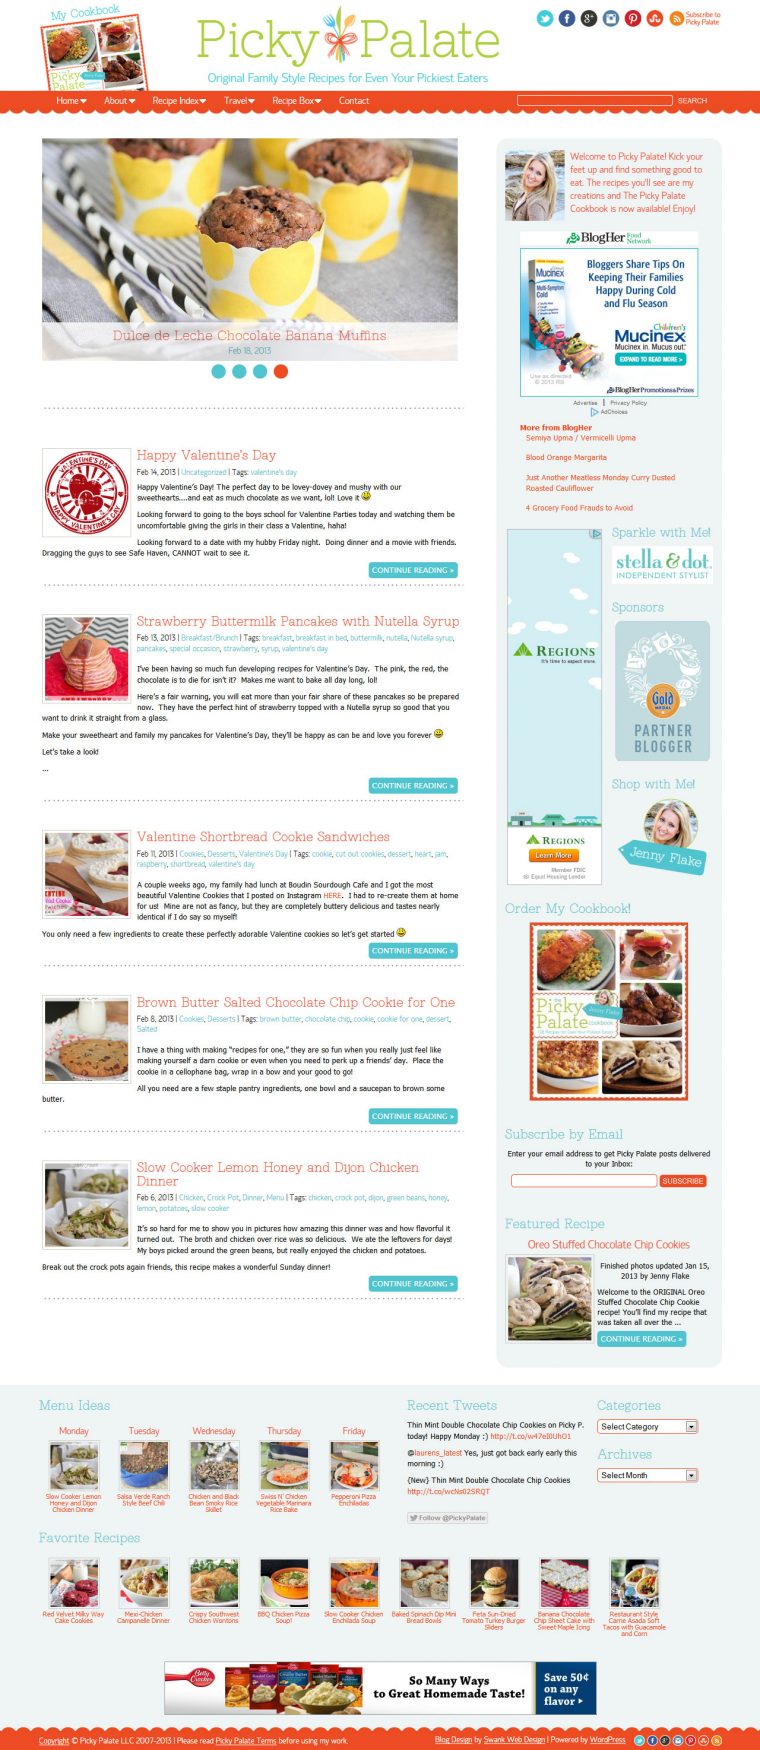 Blog Design for Picky Palate by Swank Web Design